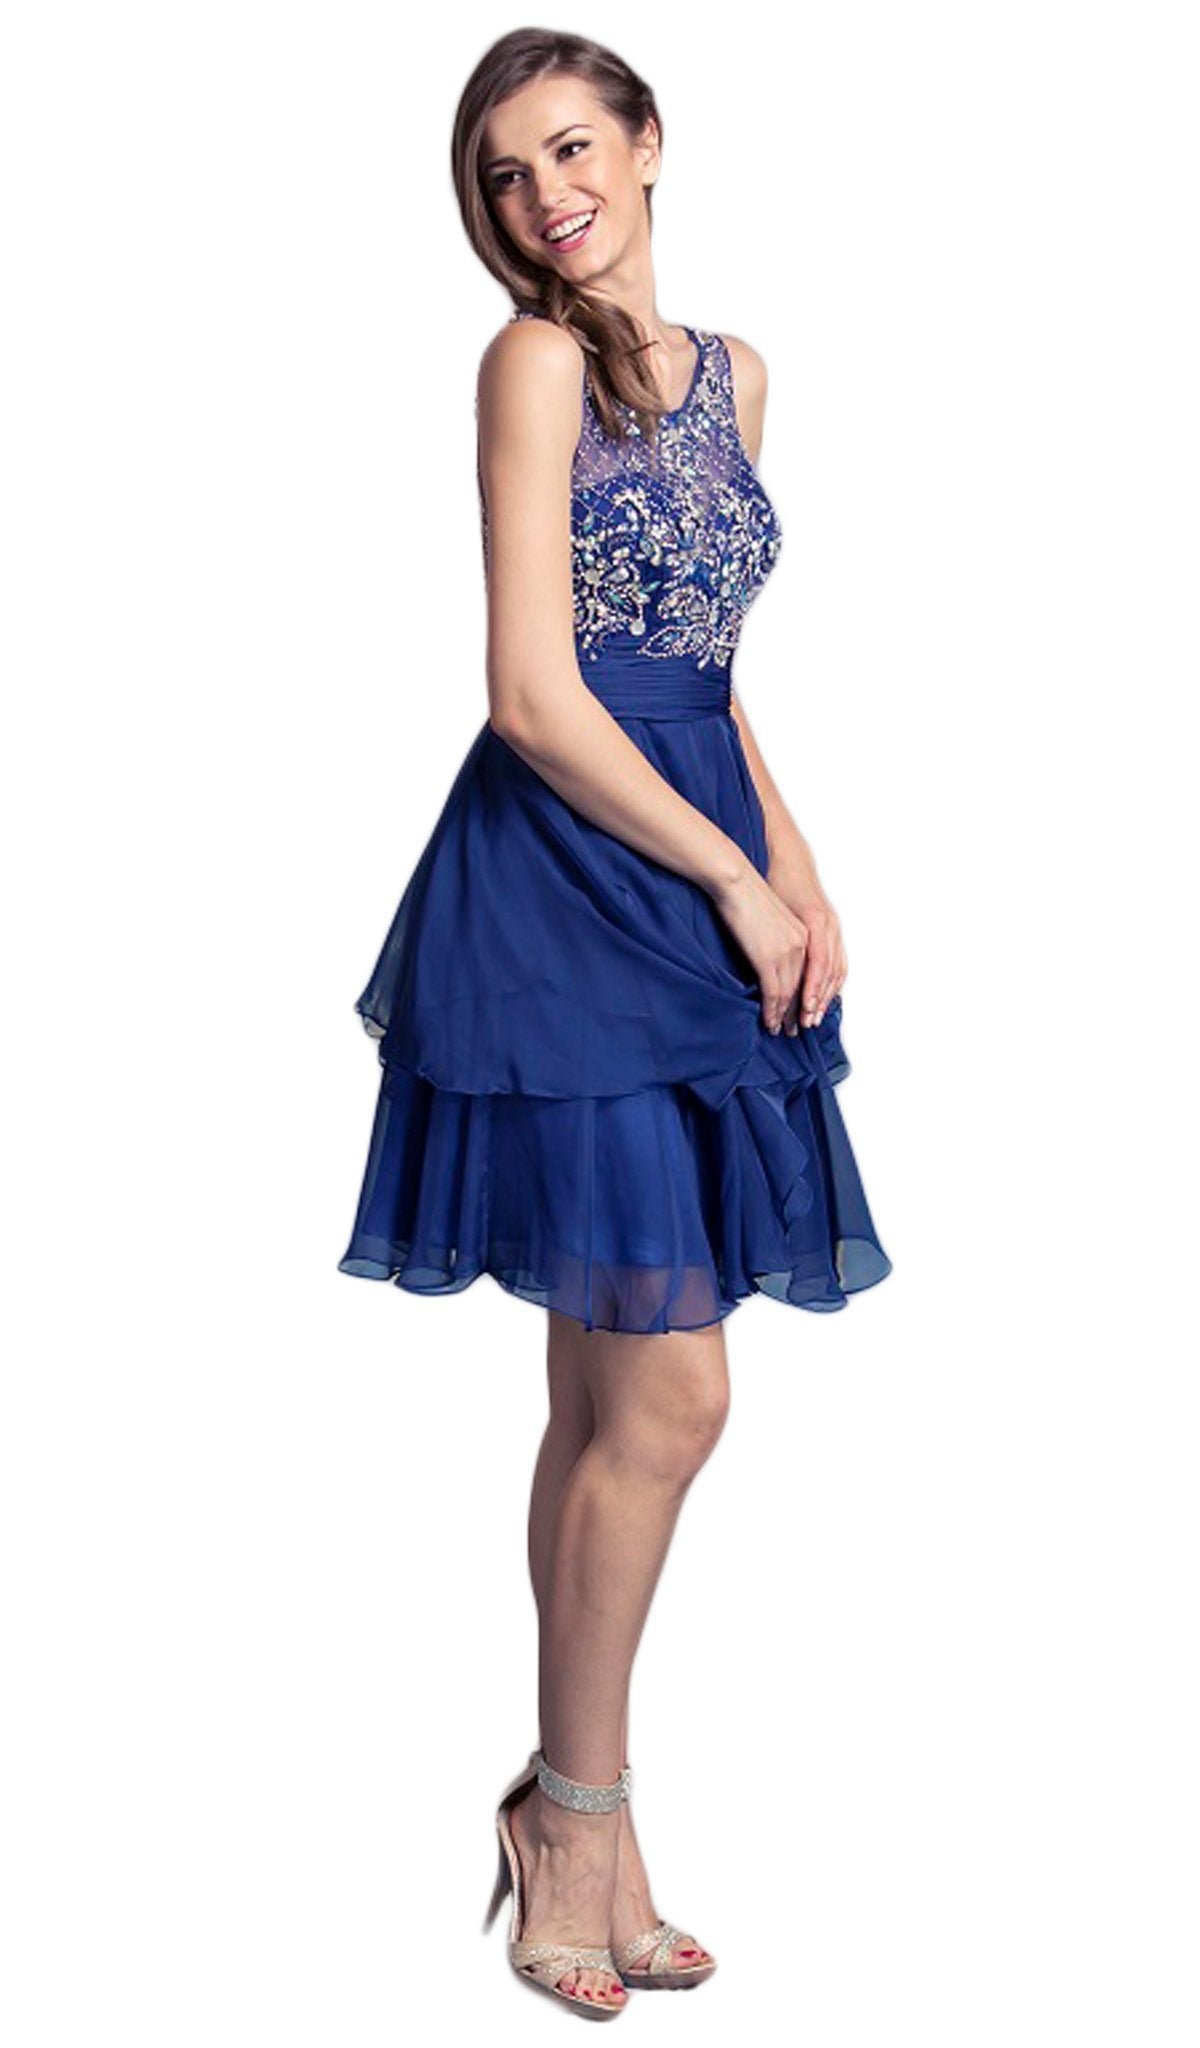 Aspeed Design - Dazzling Tiered A-line Homecoming Dress
